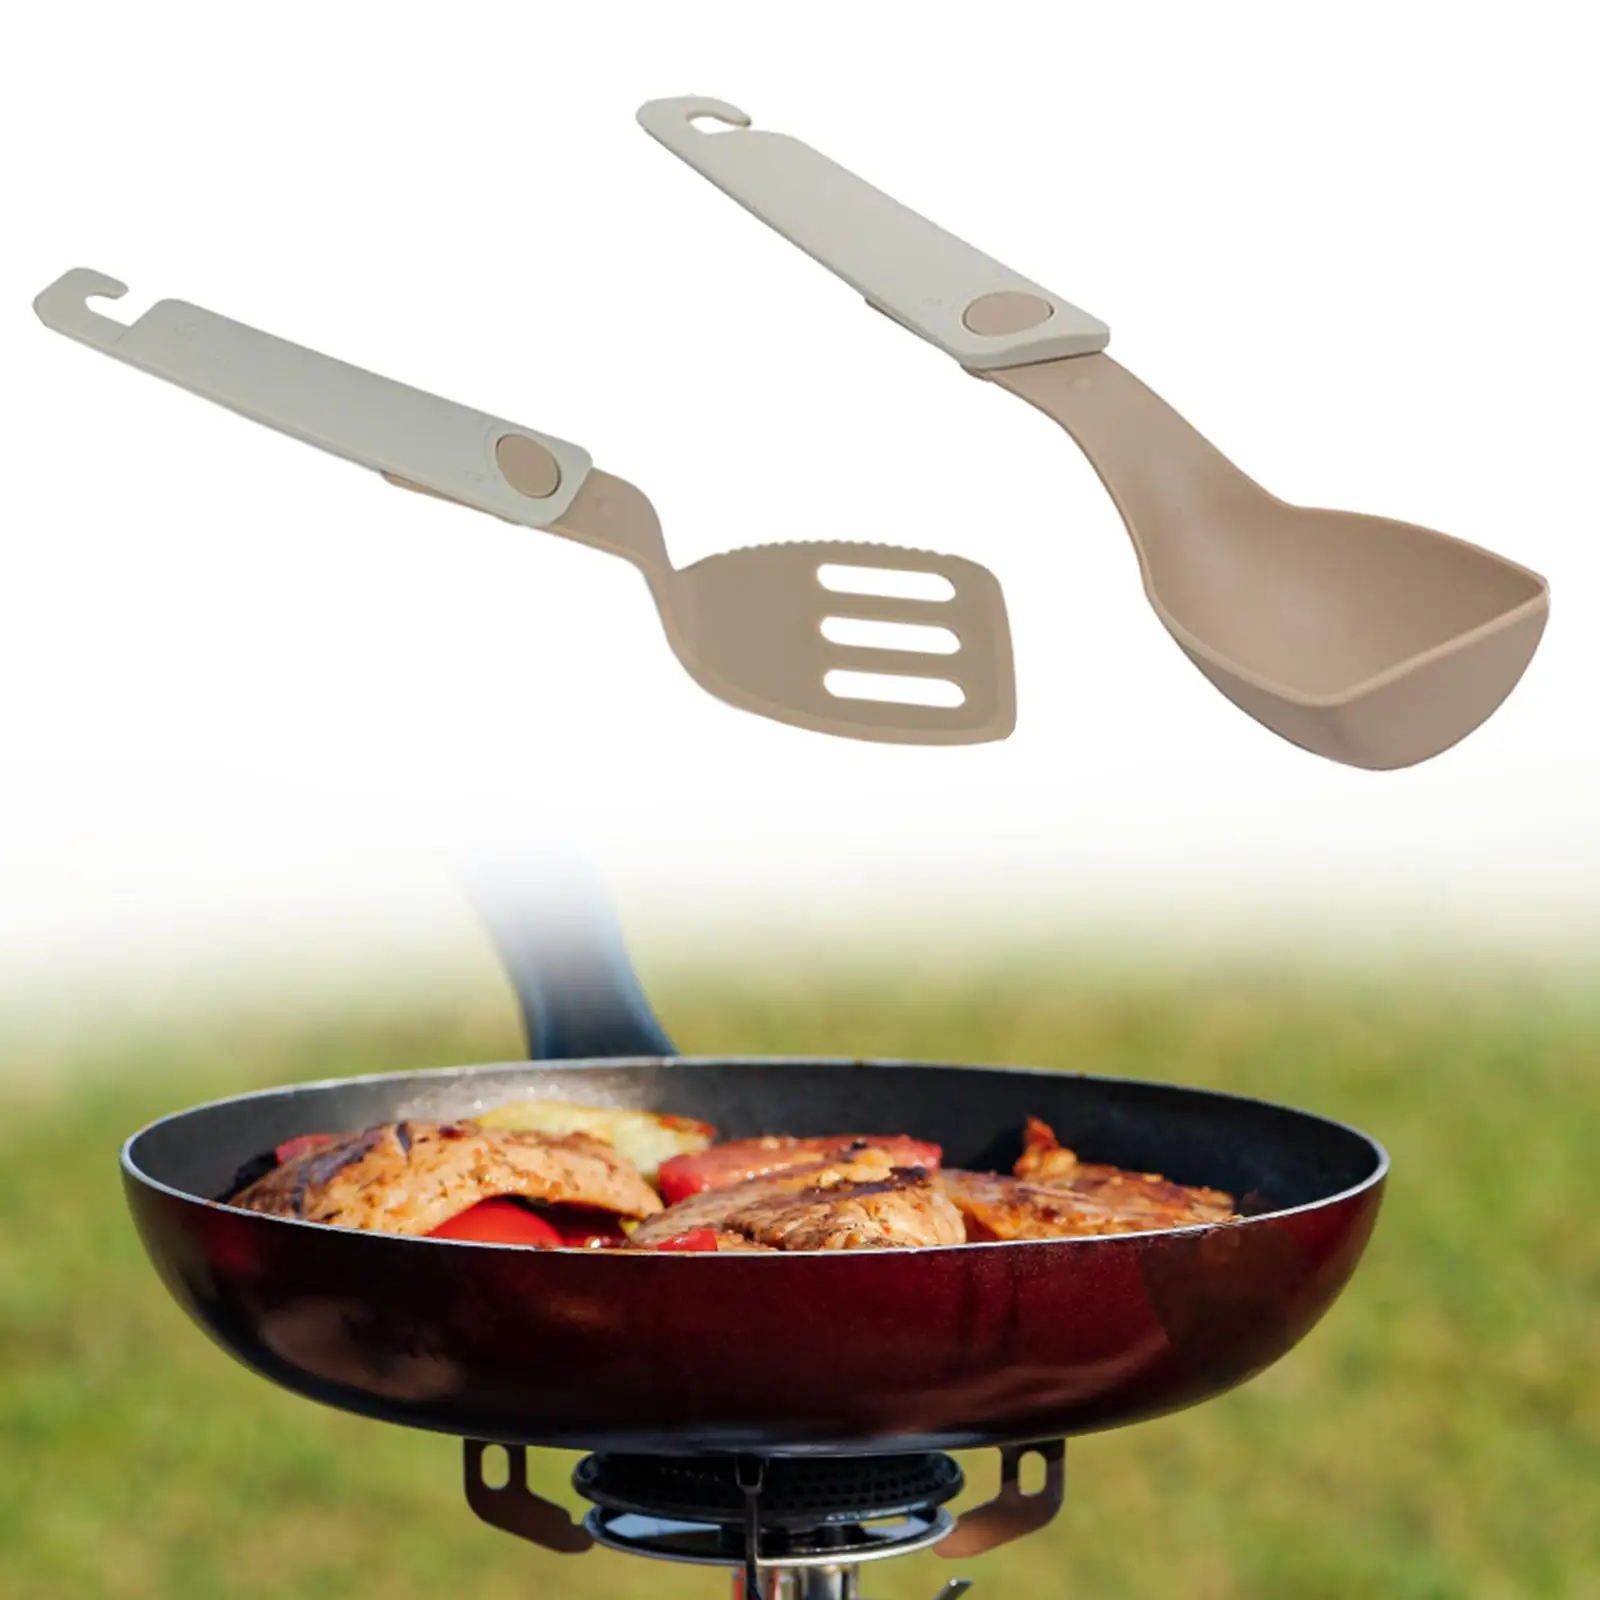 Camping Cutlery Foldable Reusable Cooking Utensil Outdoor Tableware Cookware for Travel Backpacking Hiking Picnic Kitchen